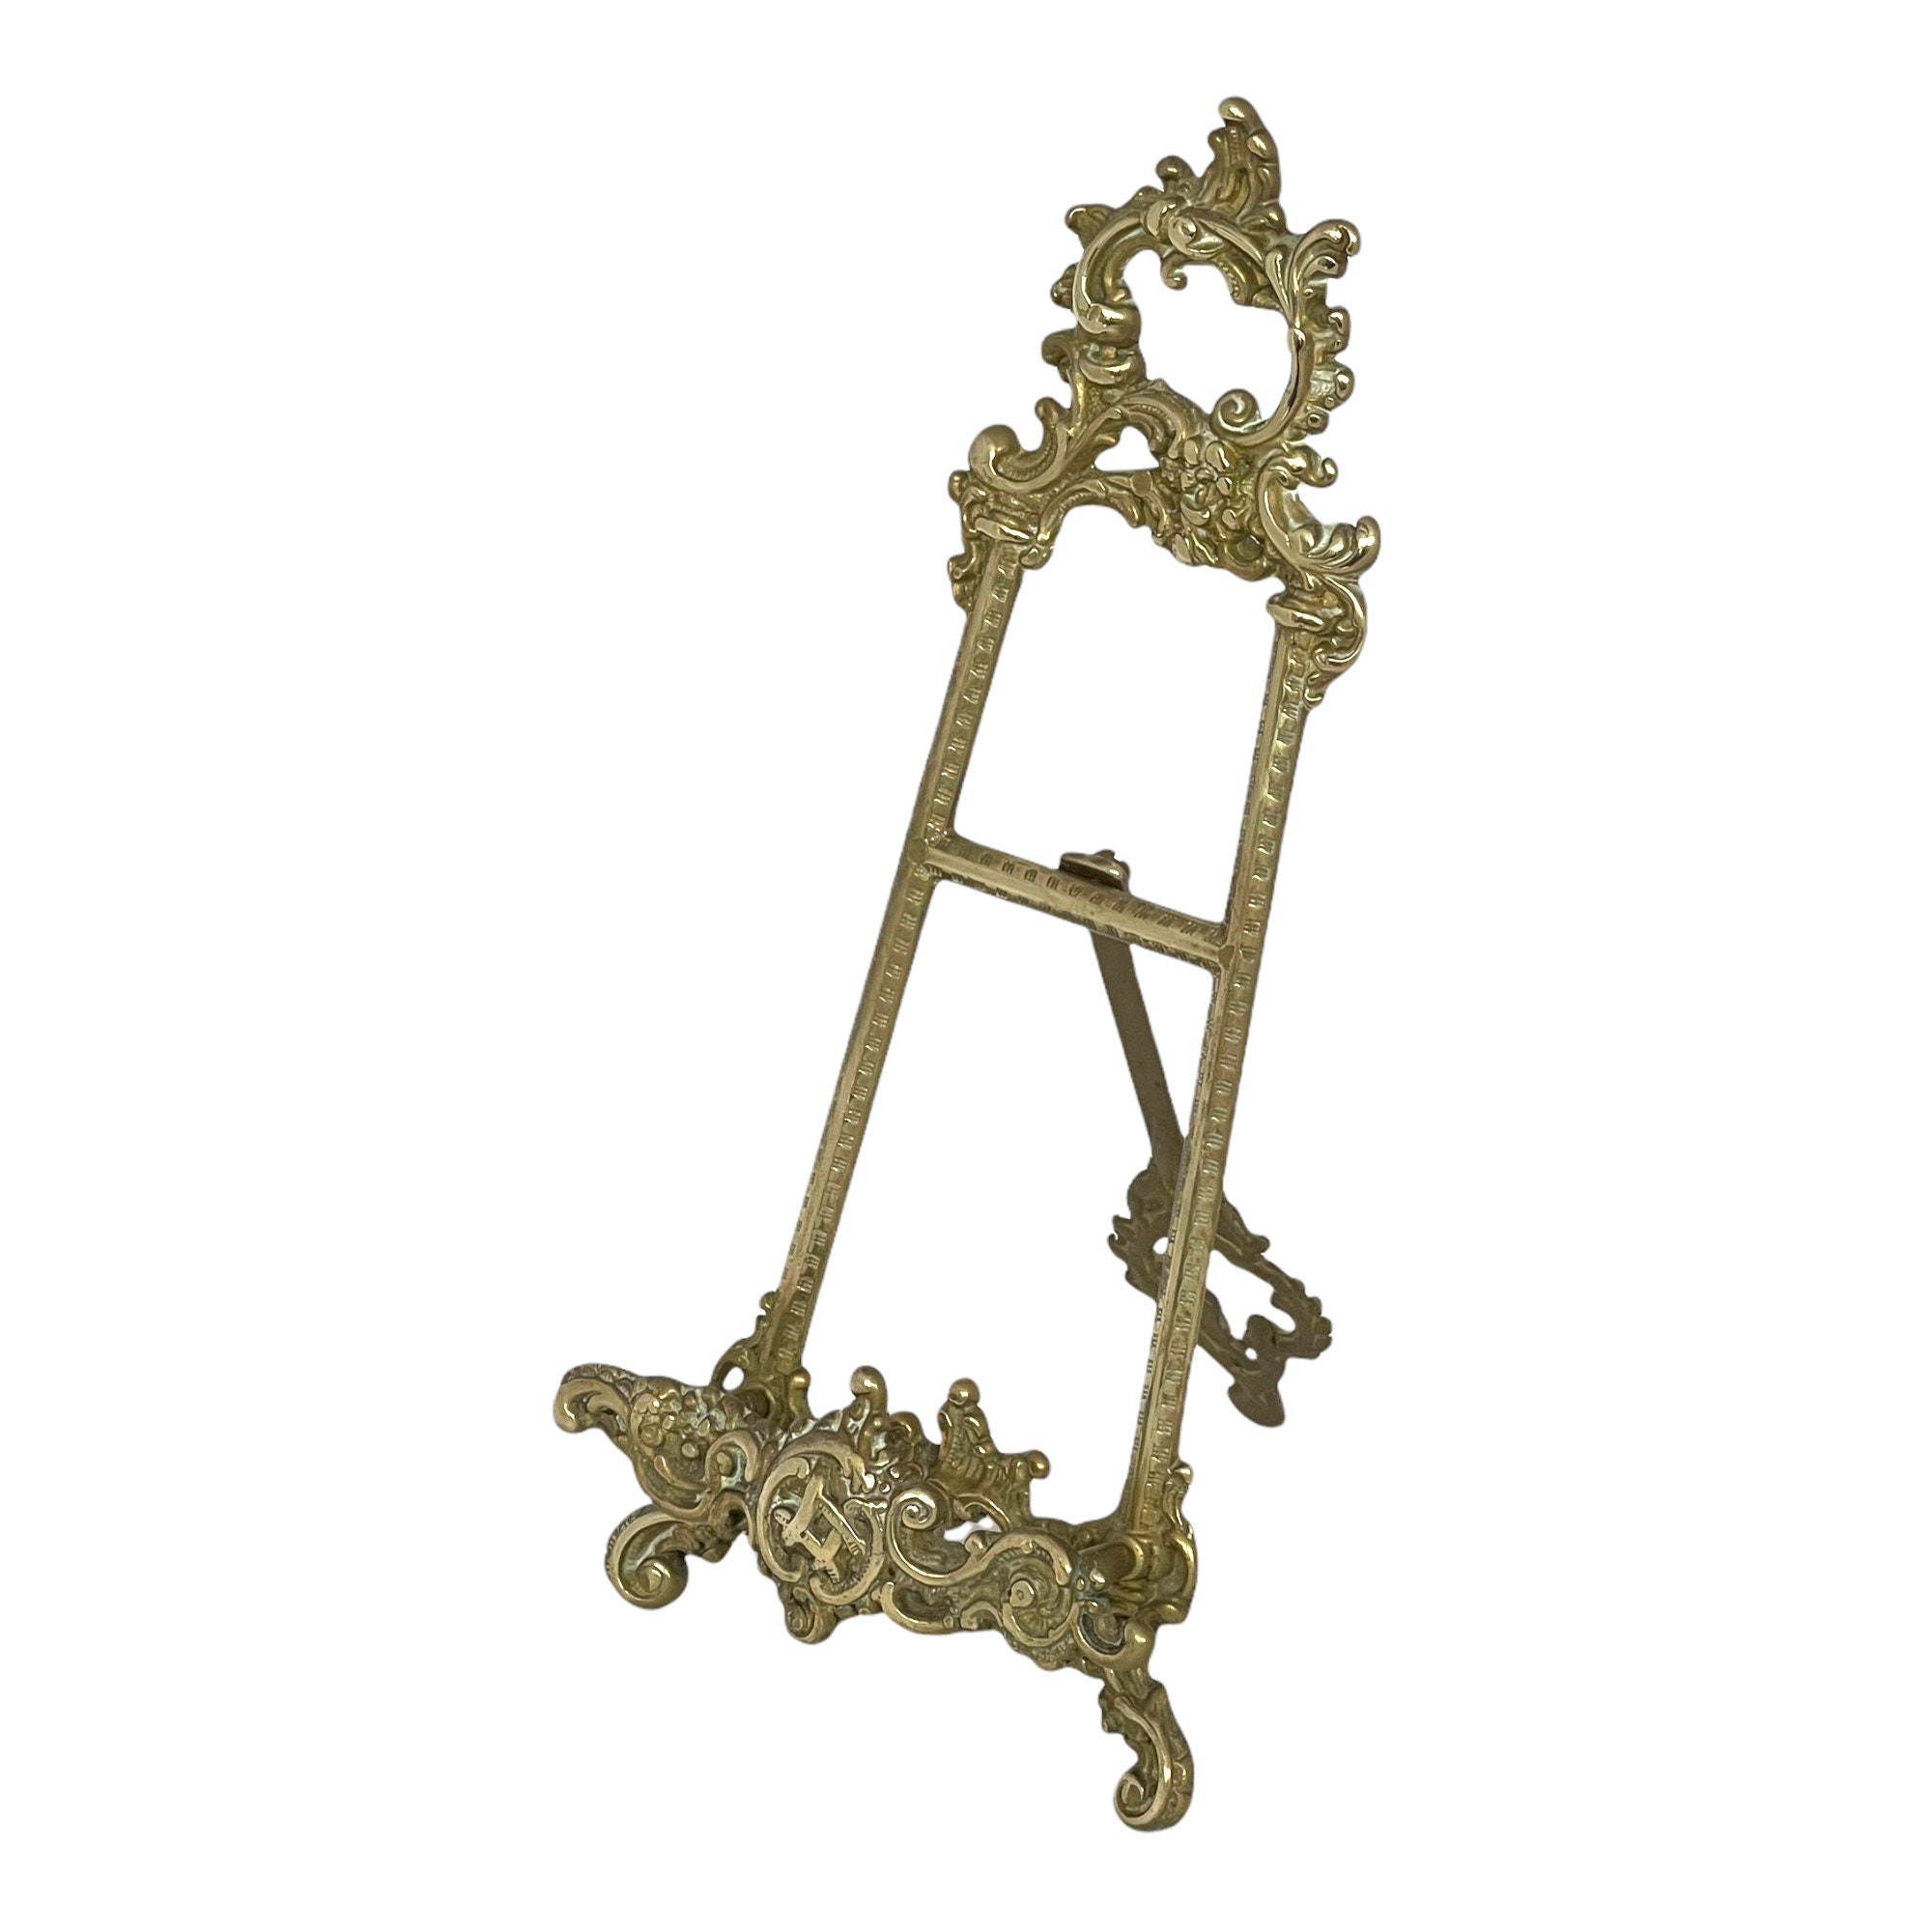 Solid Brass Decorative Easel Bible Stand Picture Stand Menu Stand